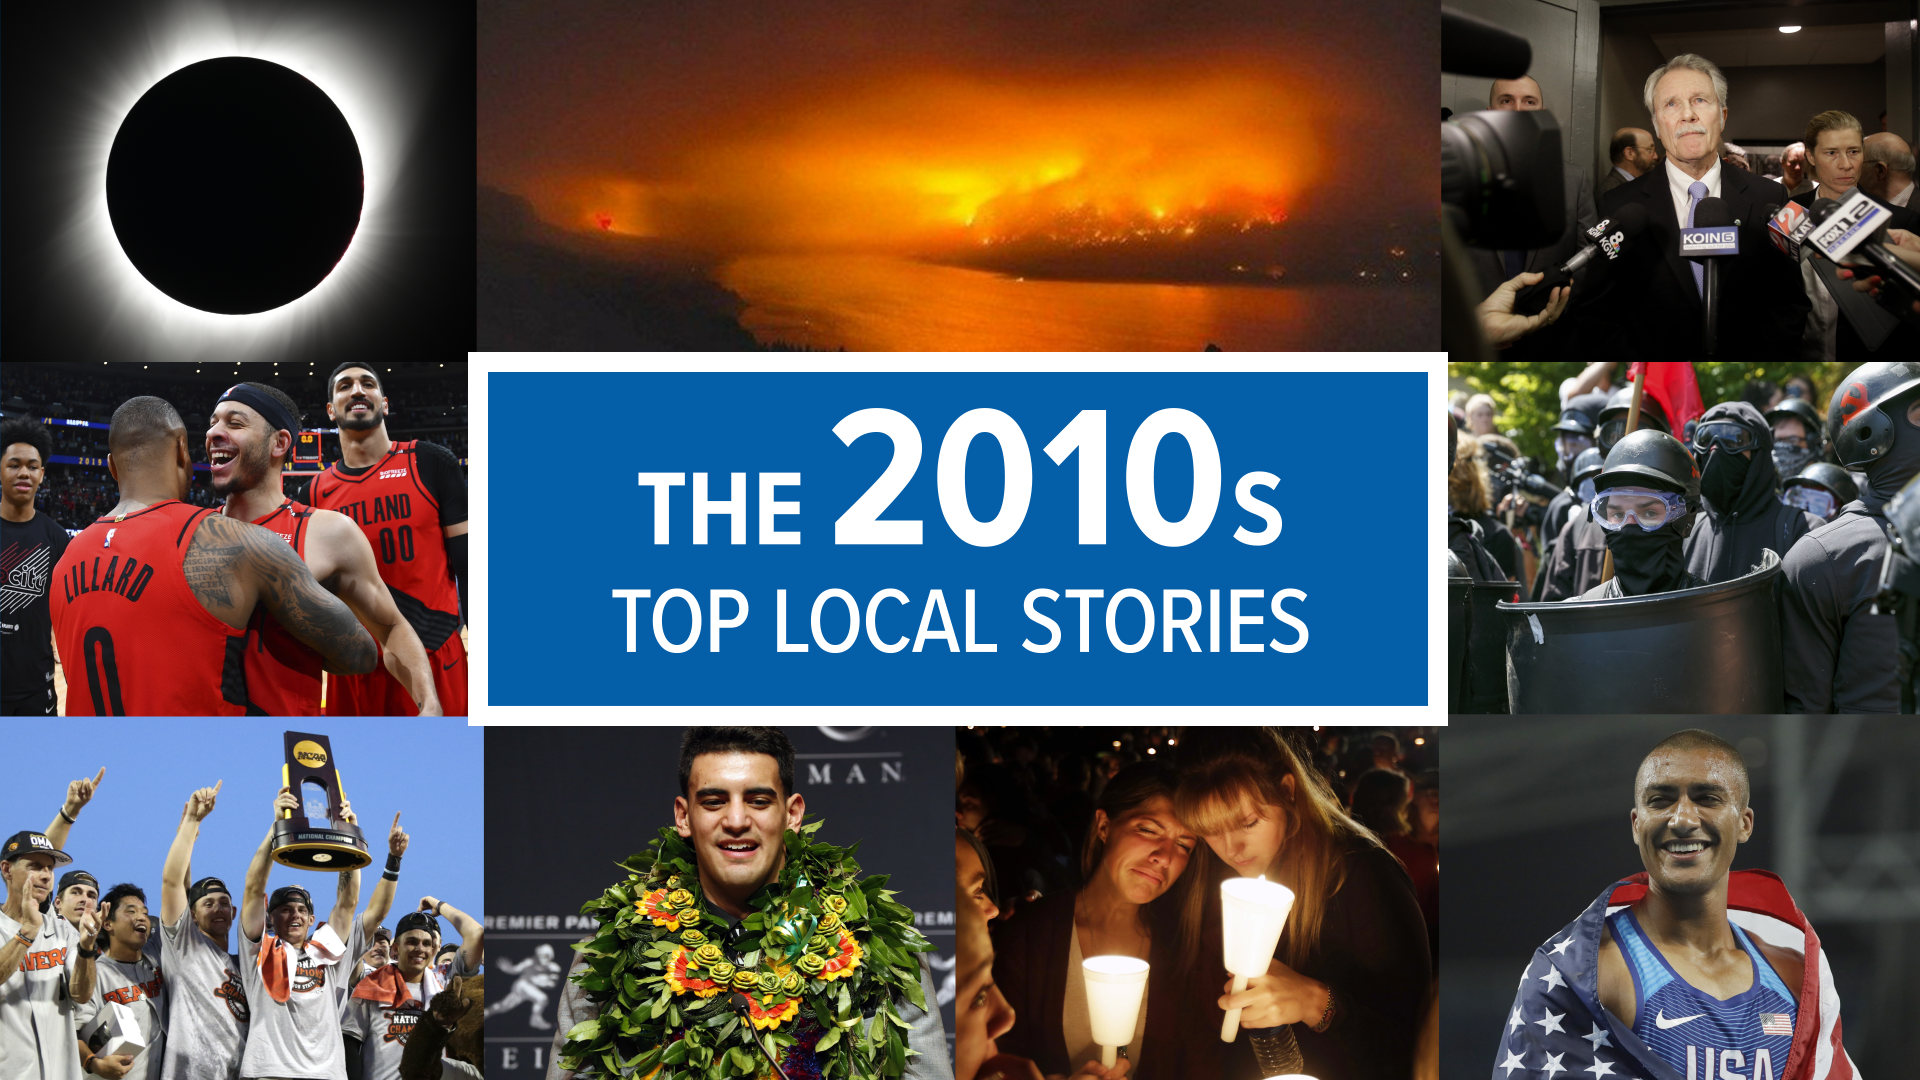 A look back at the top 5 local stories from the decade.